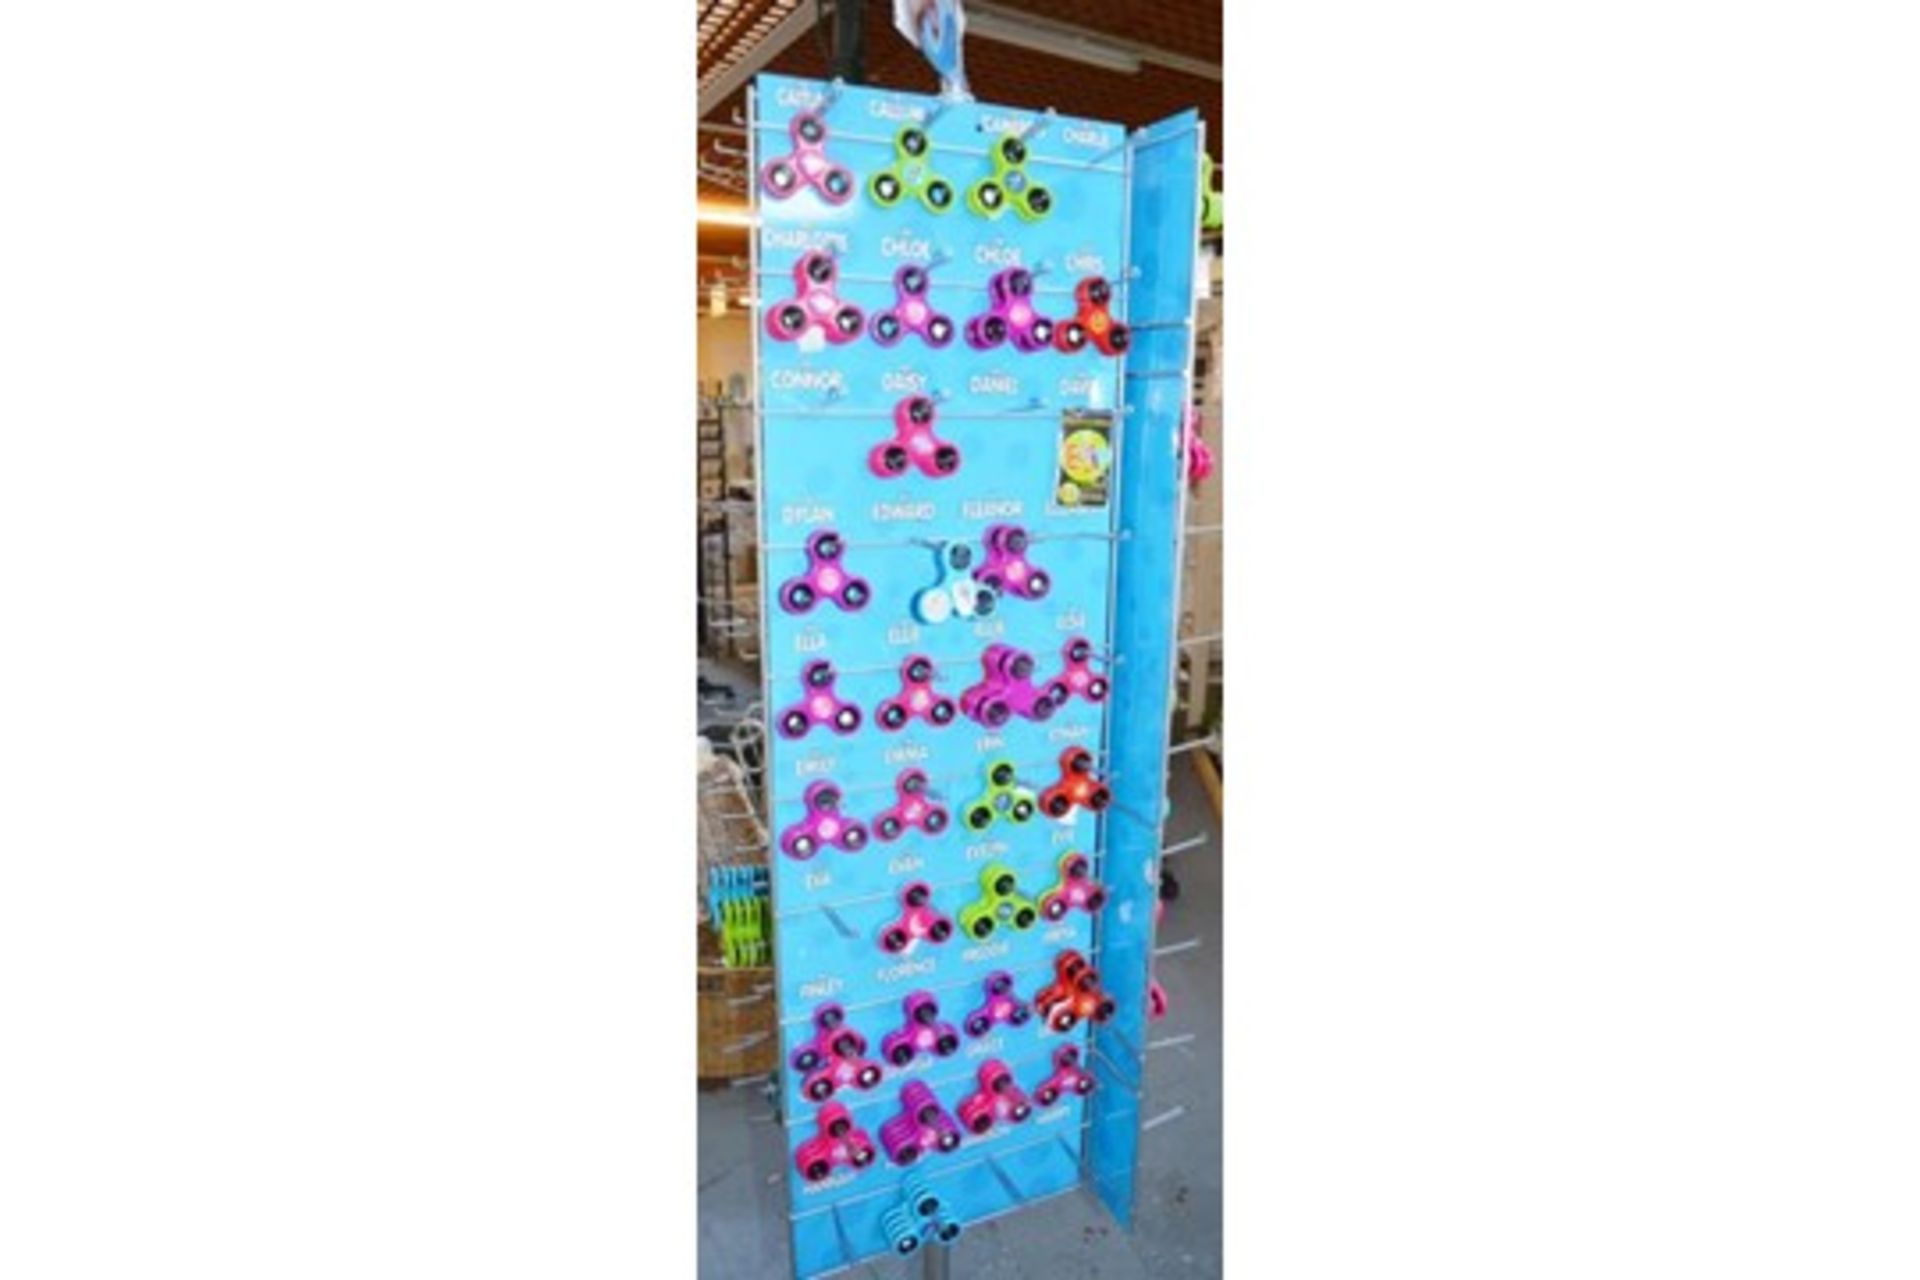 27 x Retail Carousel Display Stands With Approximately 2,800 Items of Resale Stock - Includes - Image 46 of 61